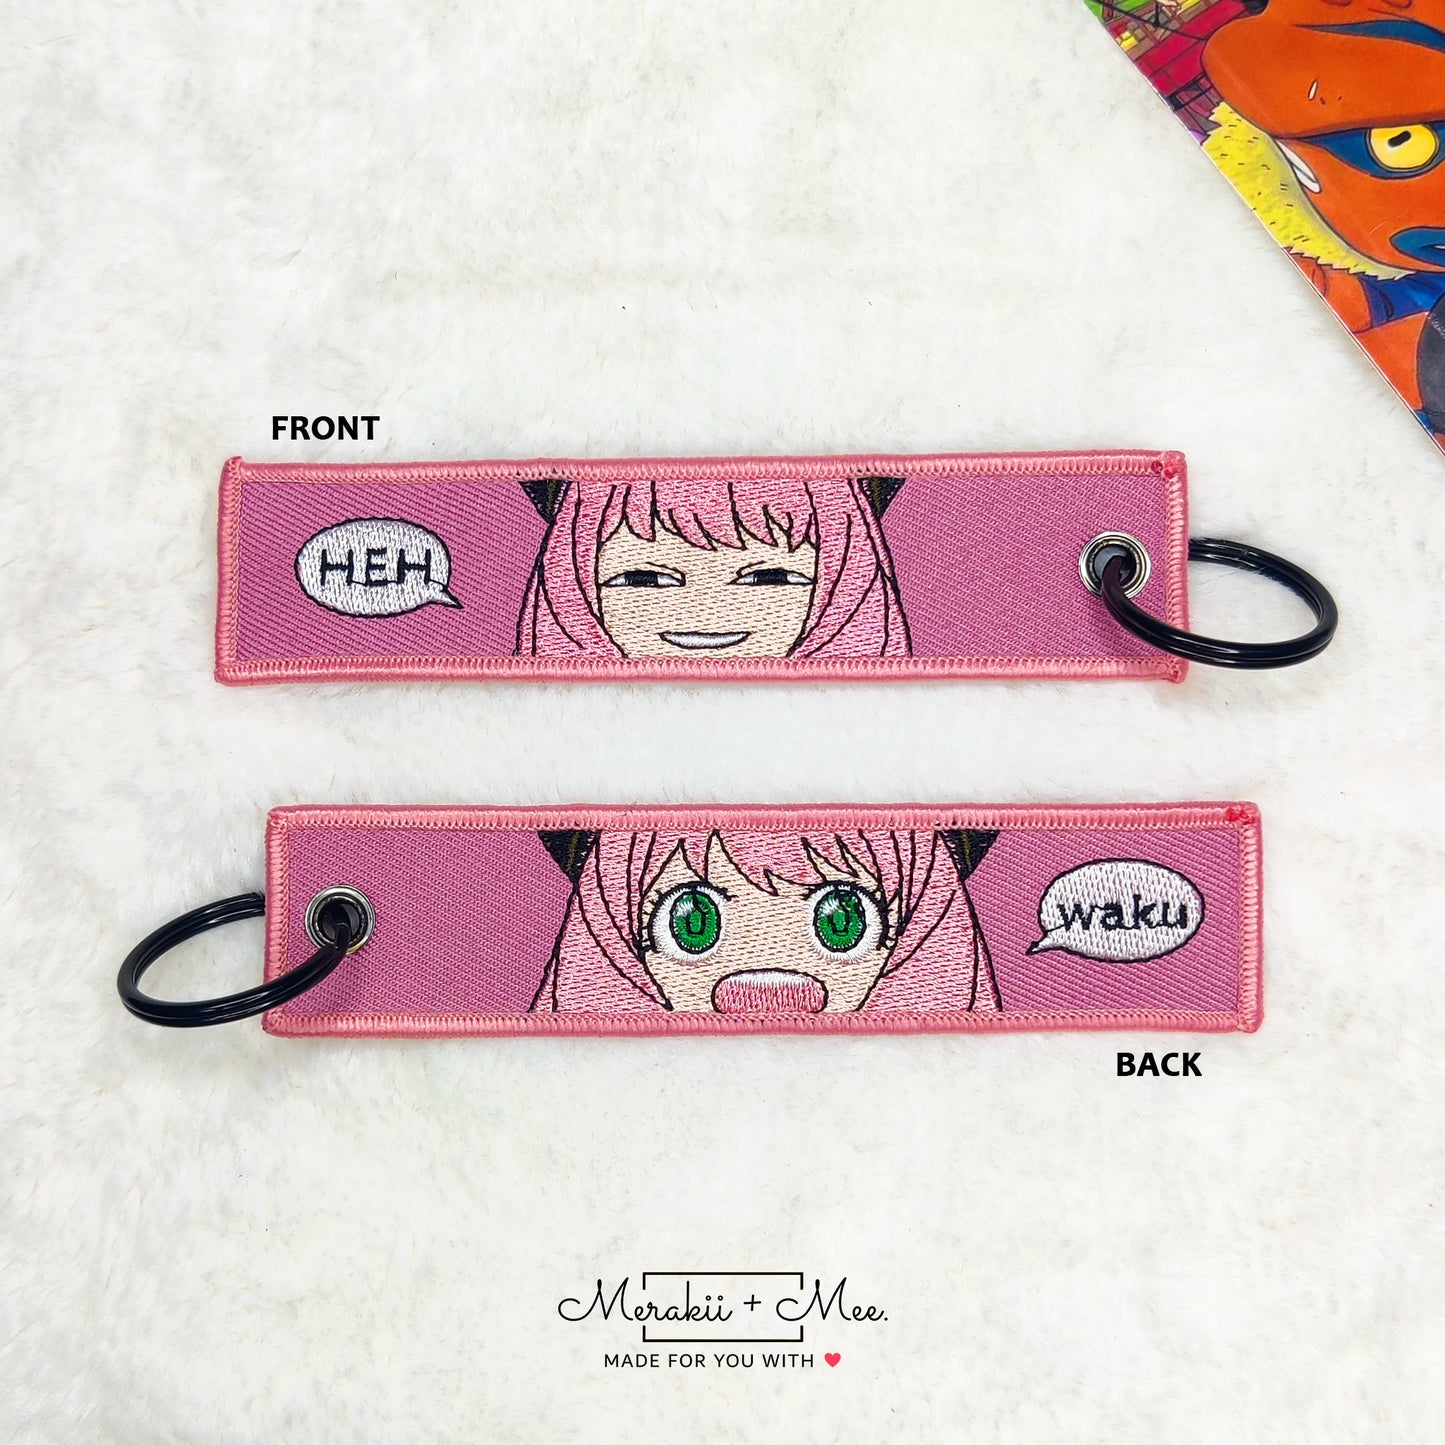 Anime Inspired Fabric Key charms for bags, keys, backpack, car and more